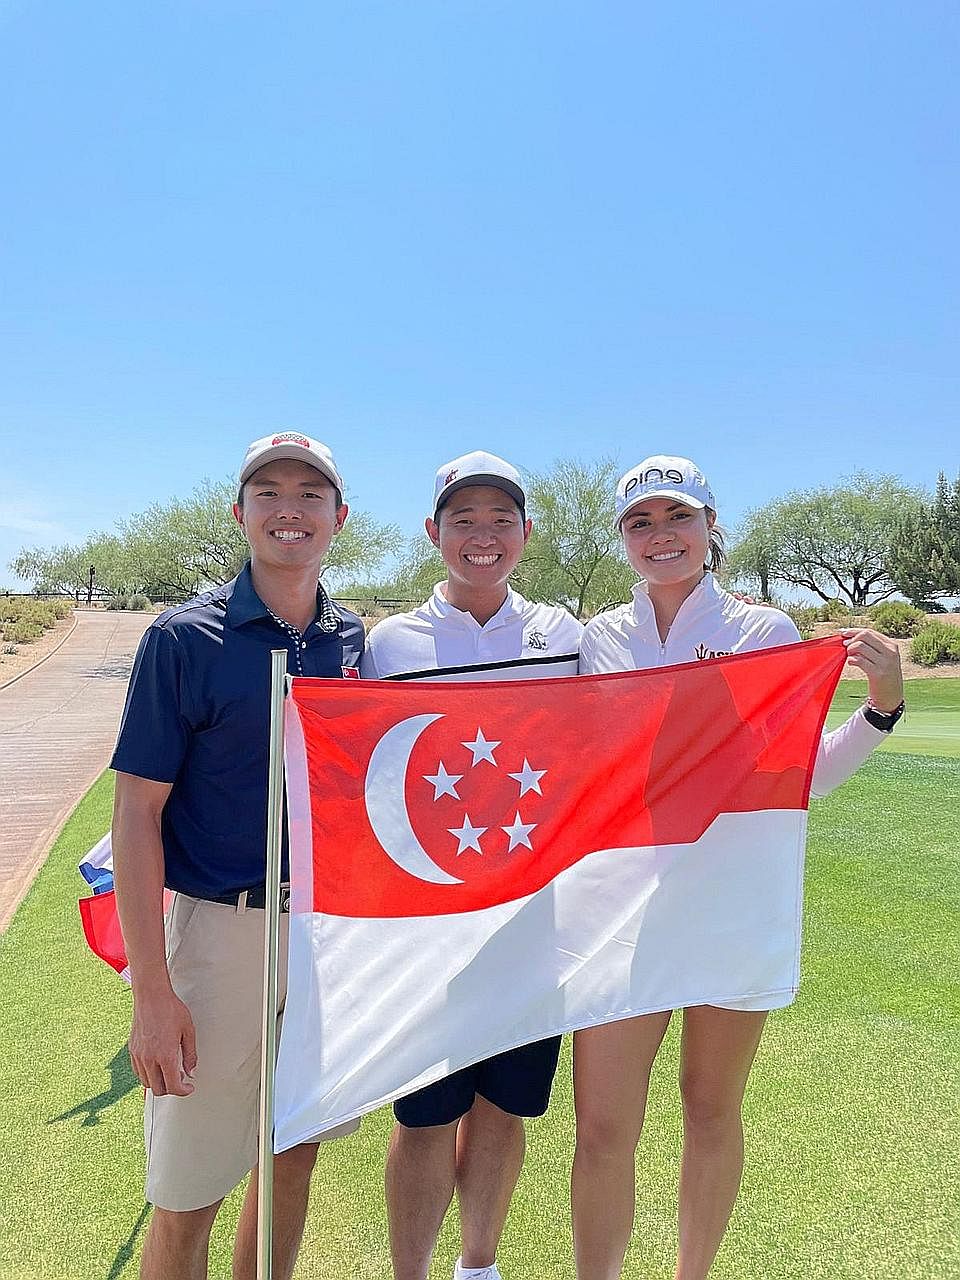 From left: James Leow, Nicklaus Chiam and Ashley Menne at the Southwestern Amateur tournament.